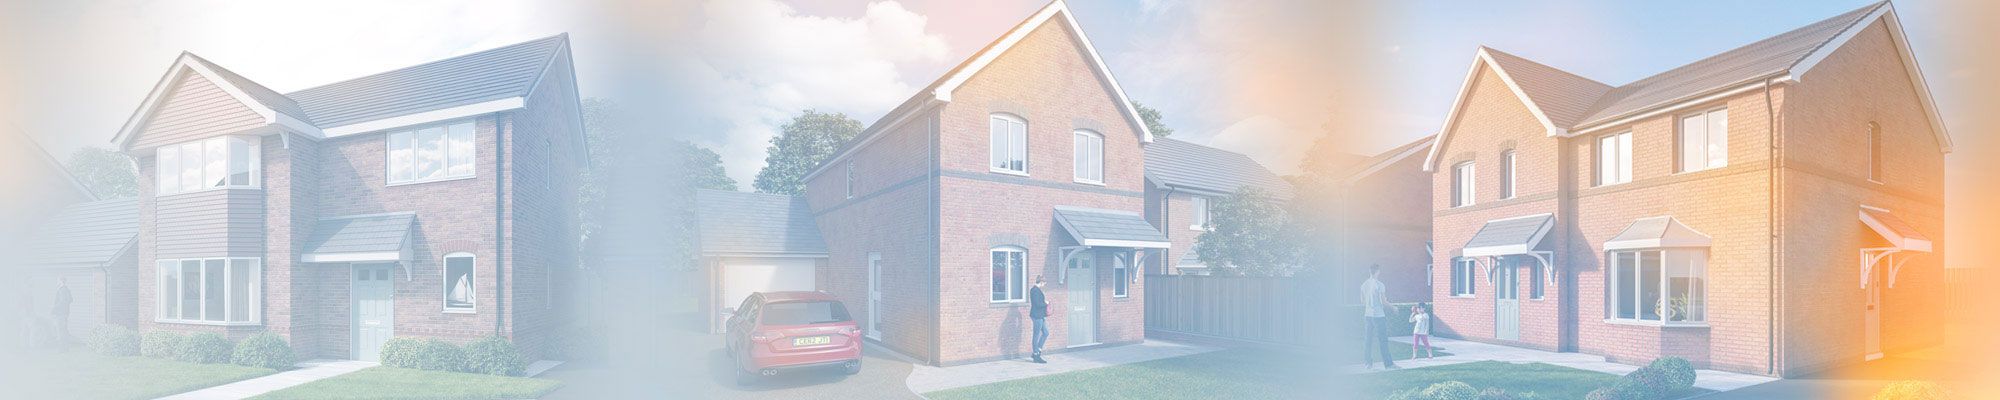 New homes in Wrexham built by Gower Homes